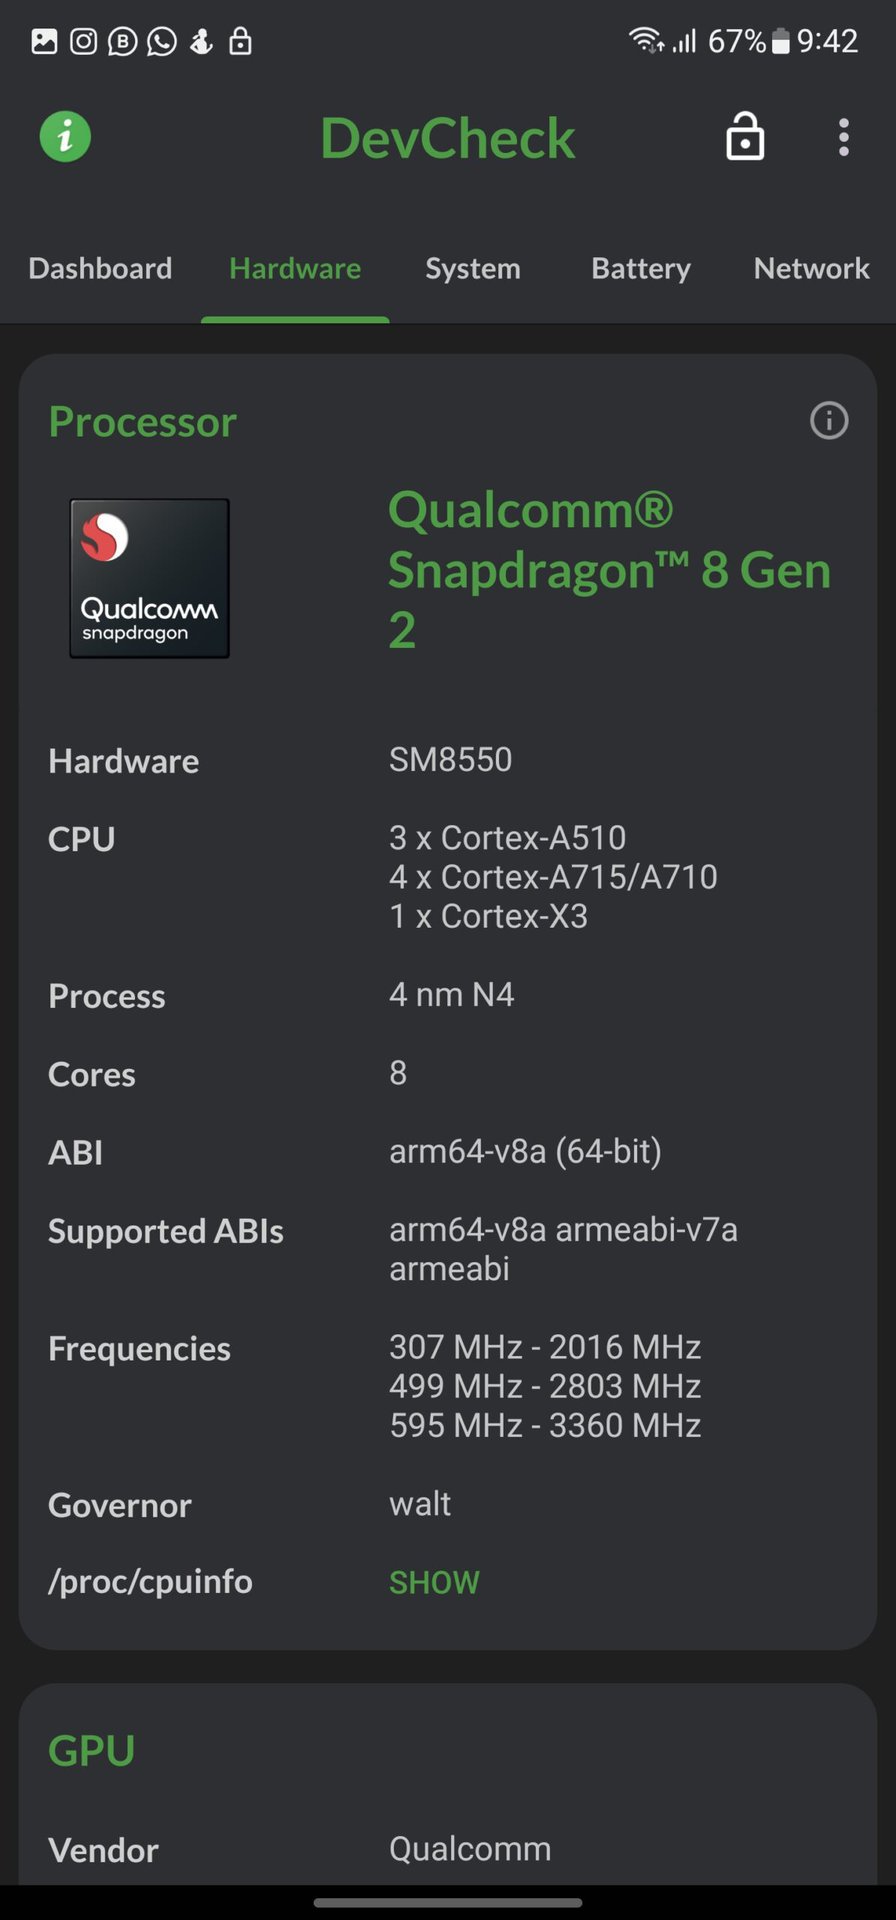 How to check if Samsung phone is Exynos or Snapdragon